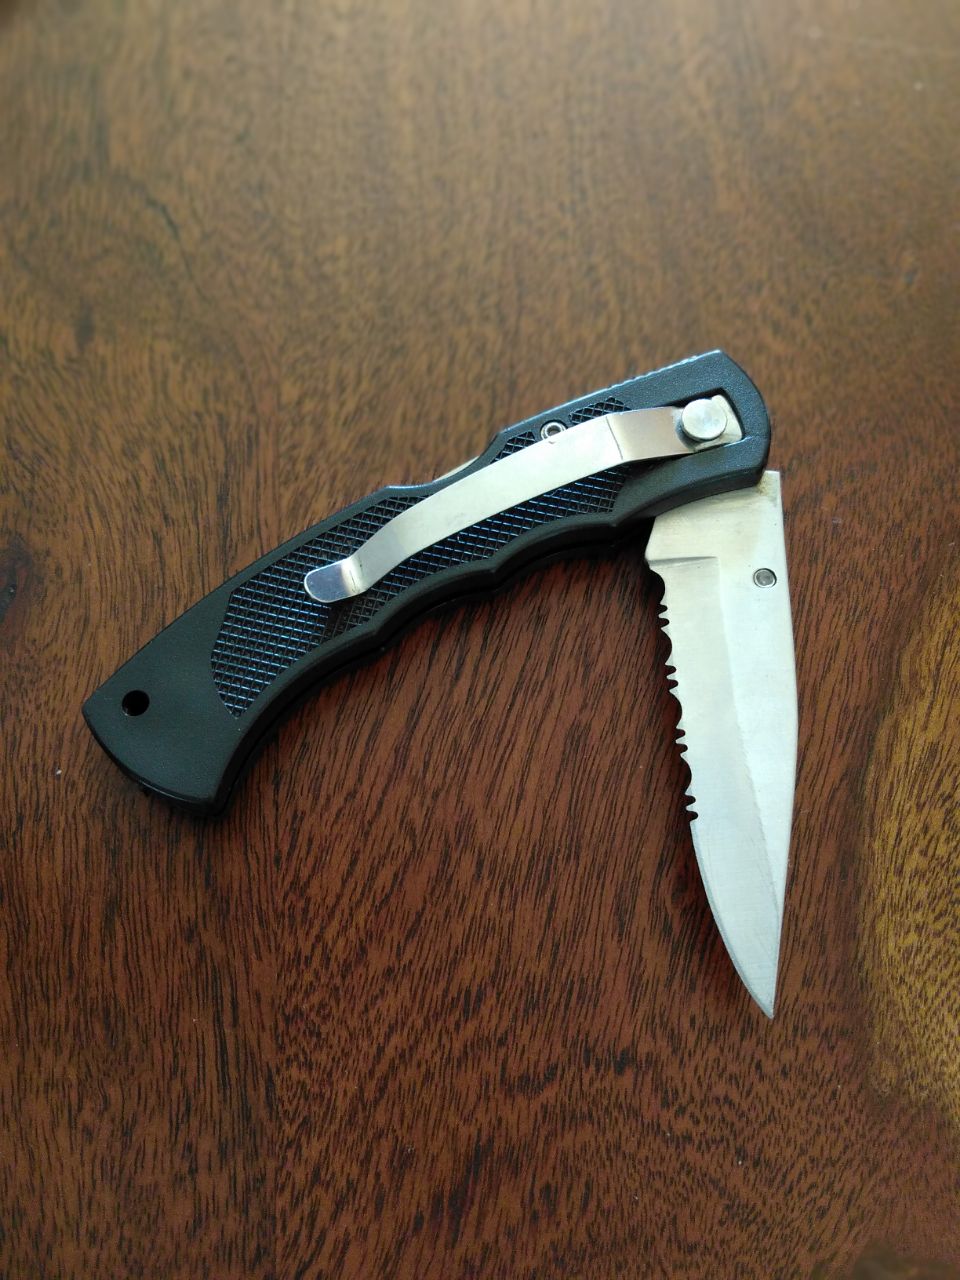 Ozark Trail knife from Wal-Mart with 420 stainless steel blade